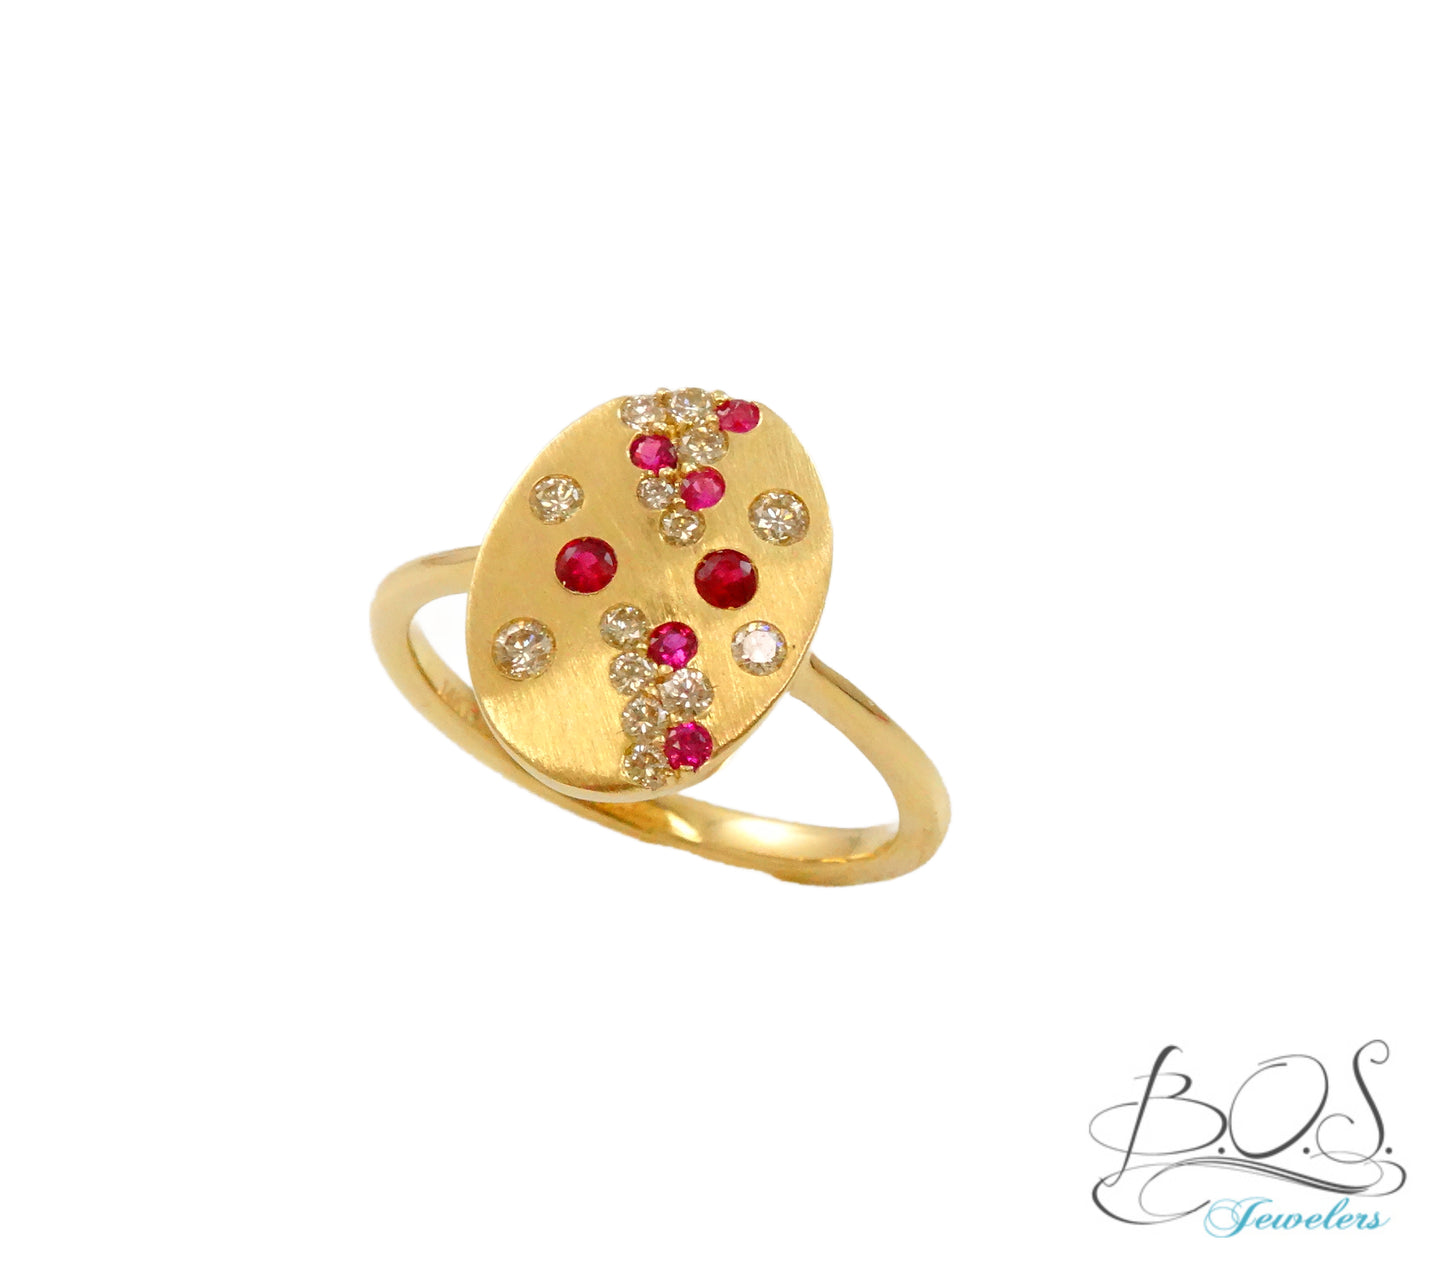 14K Gold Satin Finish Oval Diamond and Color Stone Ring